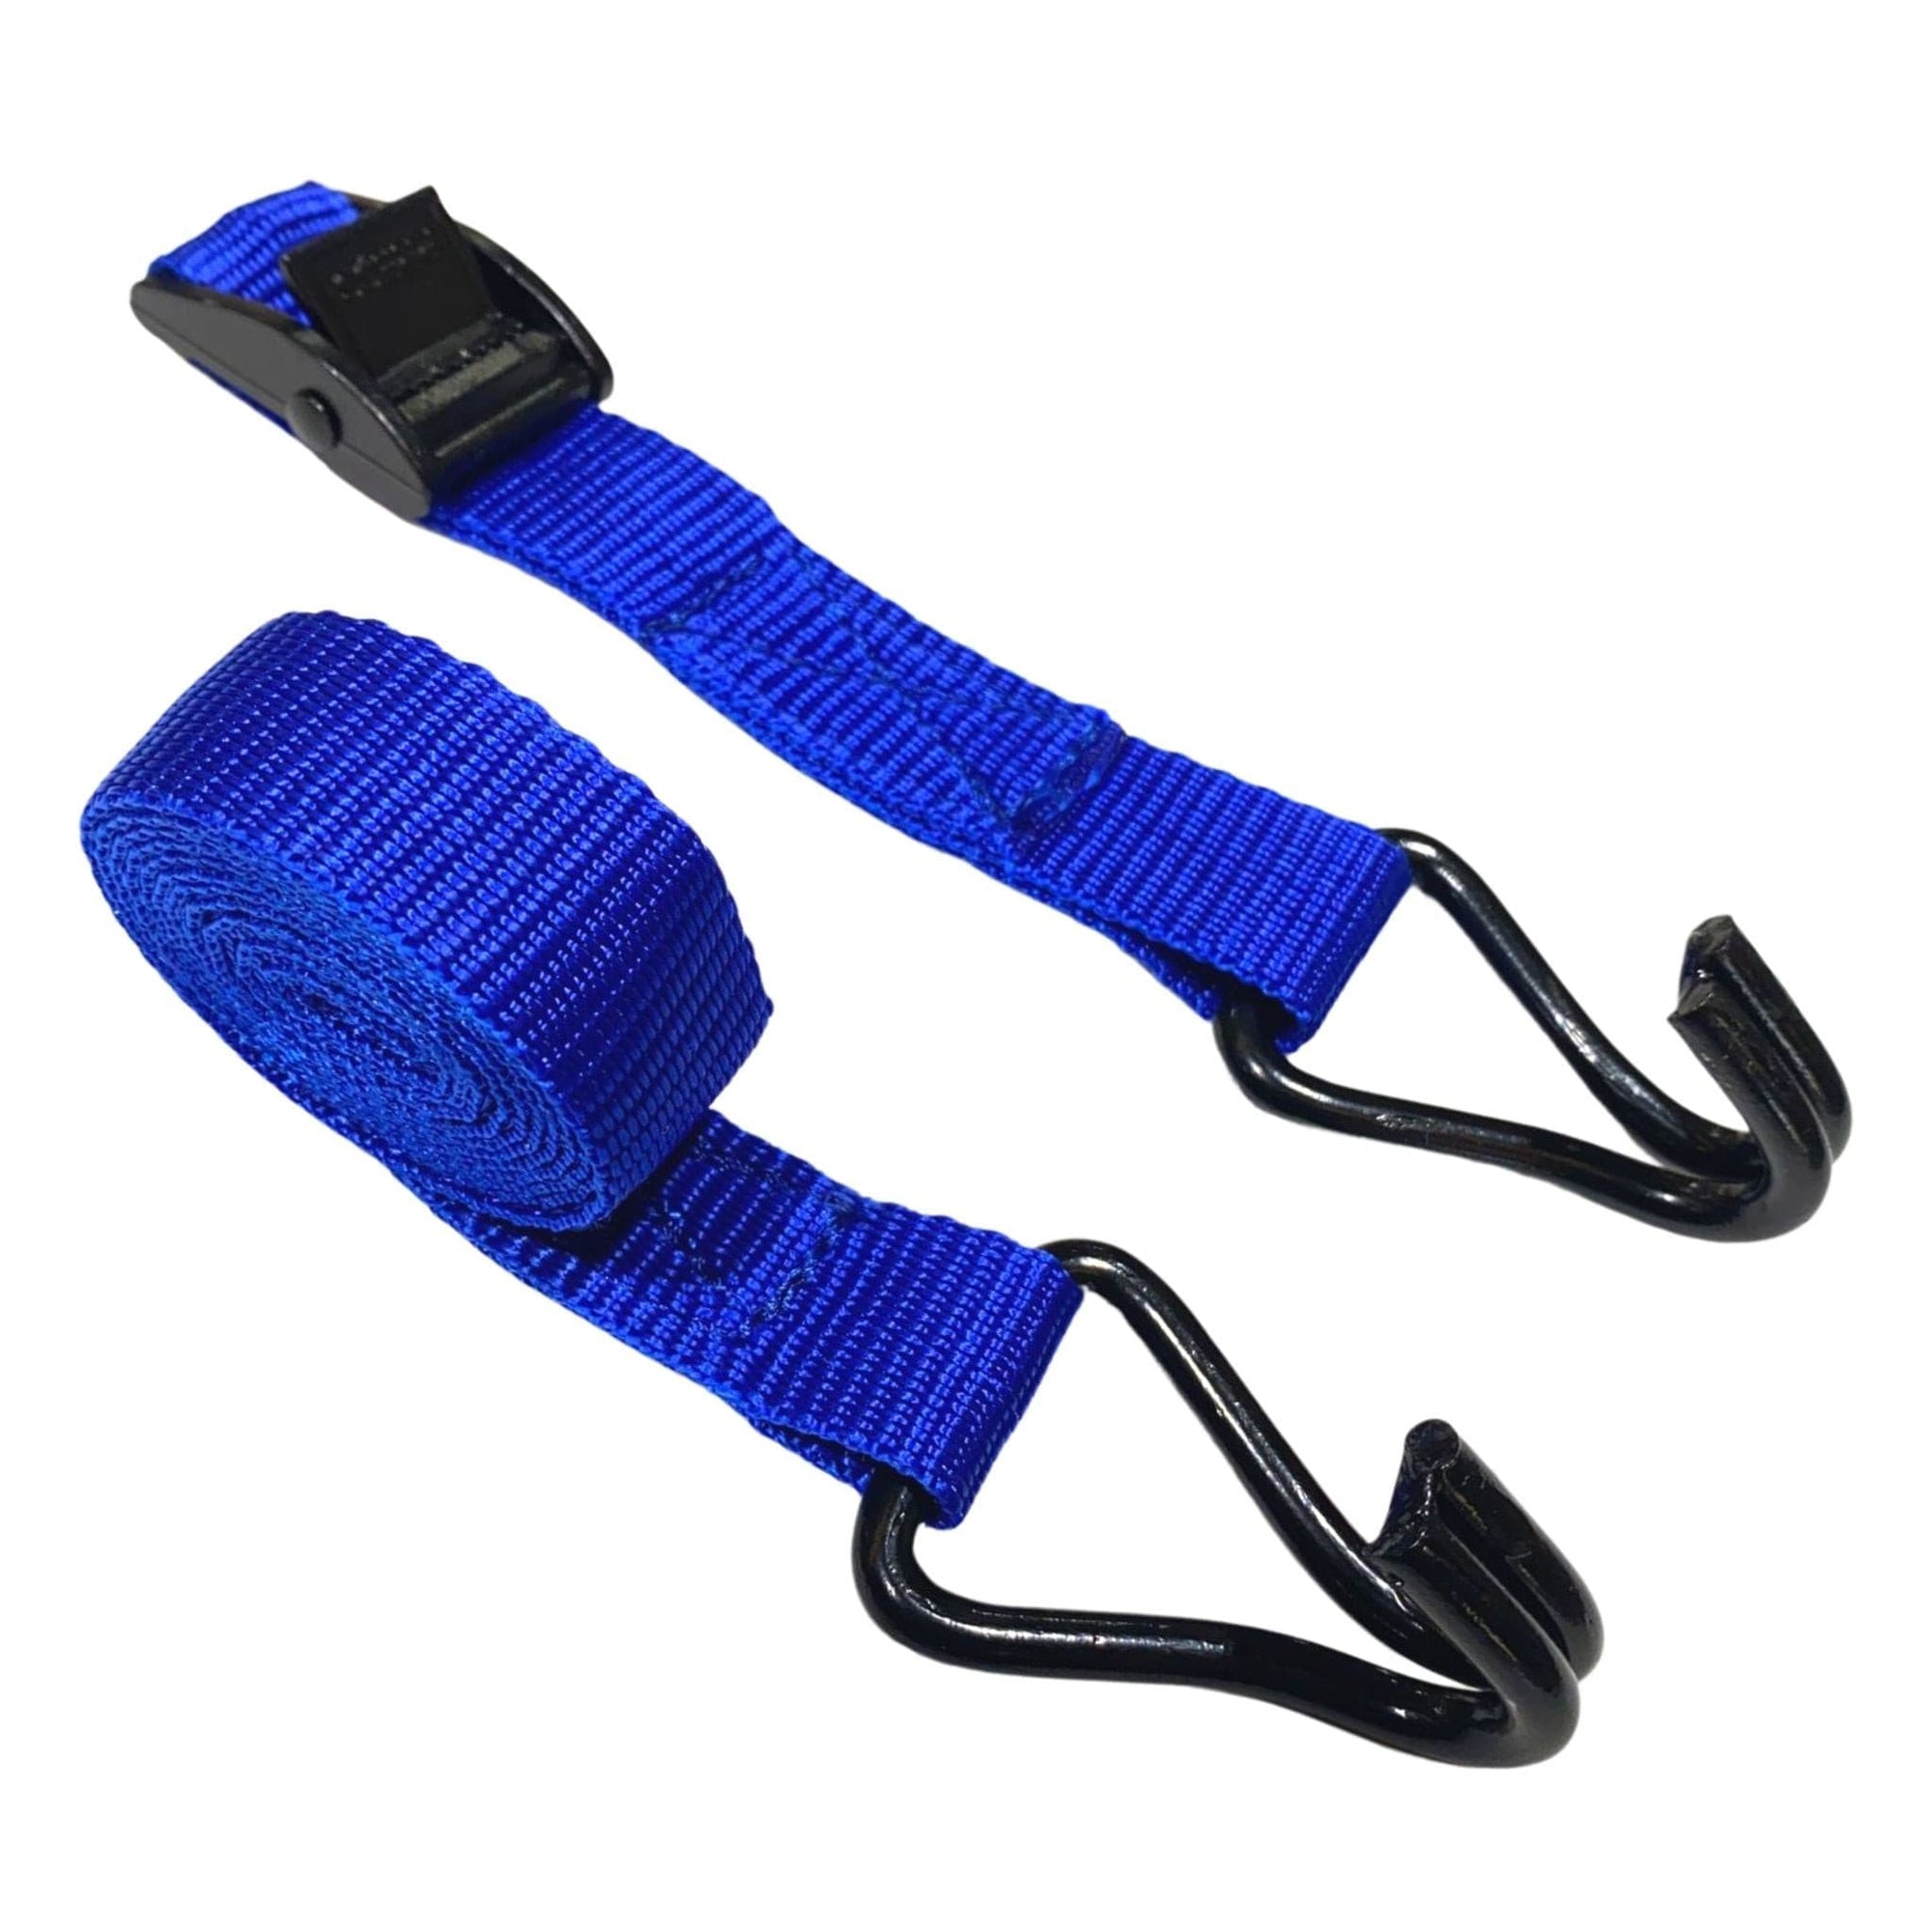 Boot tie down strap 1.5m x 25mm - South East Clearance Centre